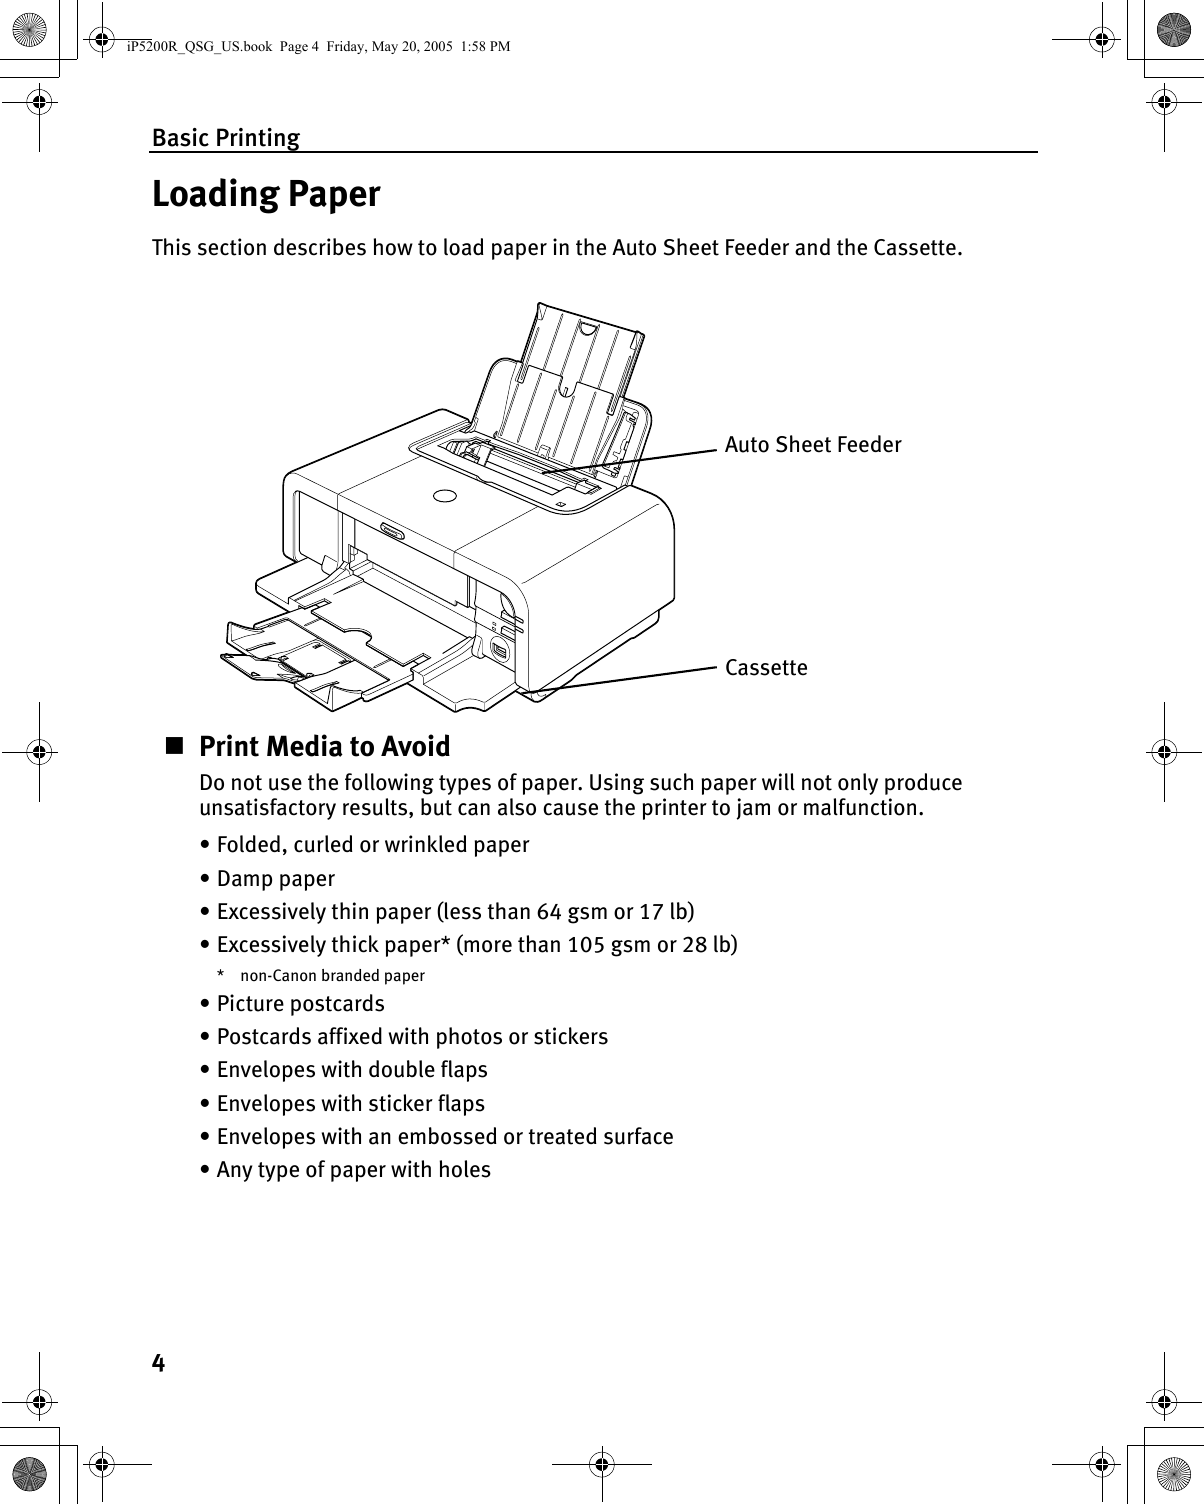 Basic Printing4Loading PaperThis section describes how to load paper in the Auto Sheet Feeder and the Cassette.Print Media to AvoidDo not use the following types of paper. Using such paper will not only produce unsatisfactory results, but can also cause the printer to jam or malfunction.• Folded, curled or wrinkled paper• Damp paper• Excessively thin paper (less than 64 gsm or 17 lb)• Excessively thick paper* (more than 105 gsm or 28 lb)* non-Canon branded paper•Picture postcards• Postcards affixed with photos or stickers • Envelopes with double flaps• Envelopes with sticker flaps• Envelopes with an embossed or treated surface• Any type of paper with holesAuto Sheet FeederCassetteiP5200R_QSG_US.book  Page 4  Friday, May 20, 2005  1:58 PM